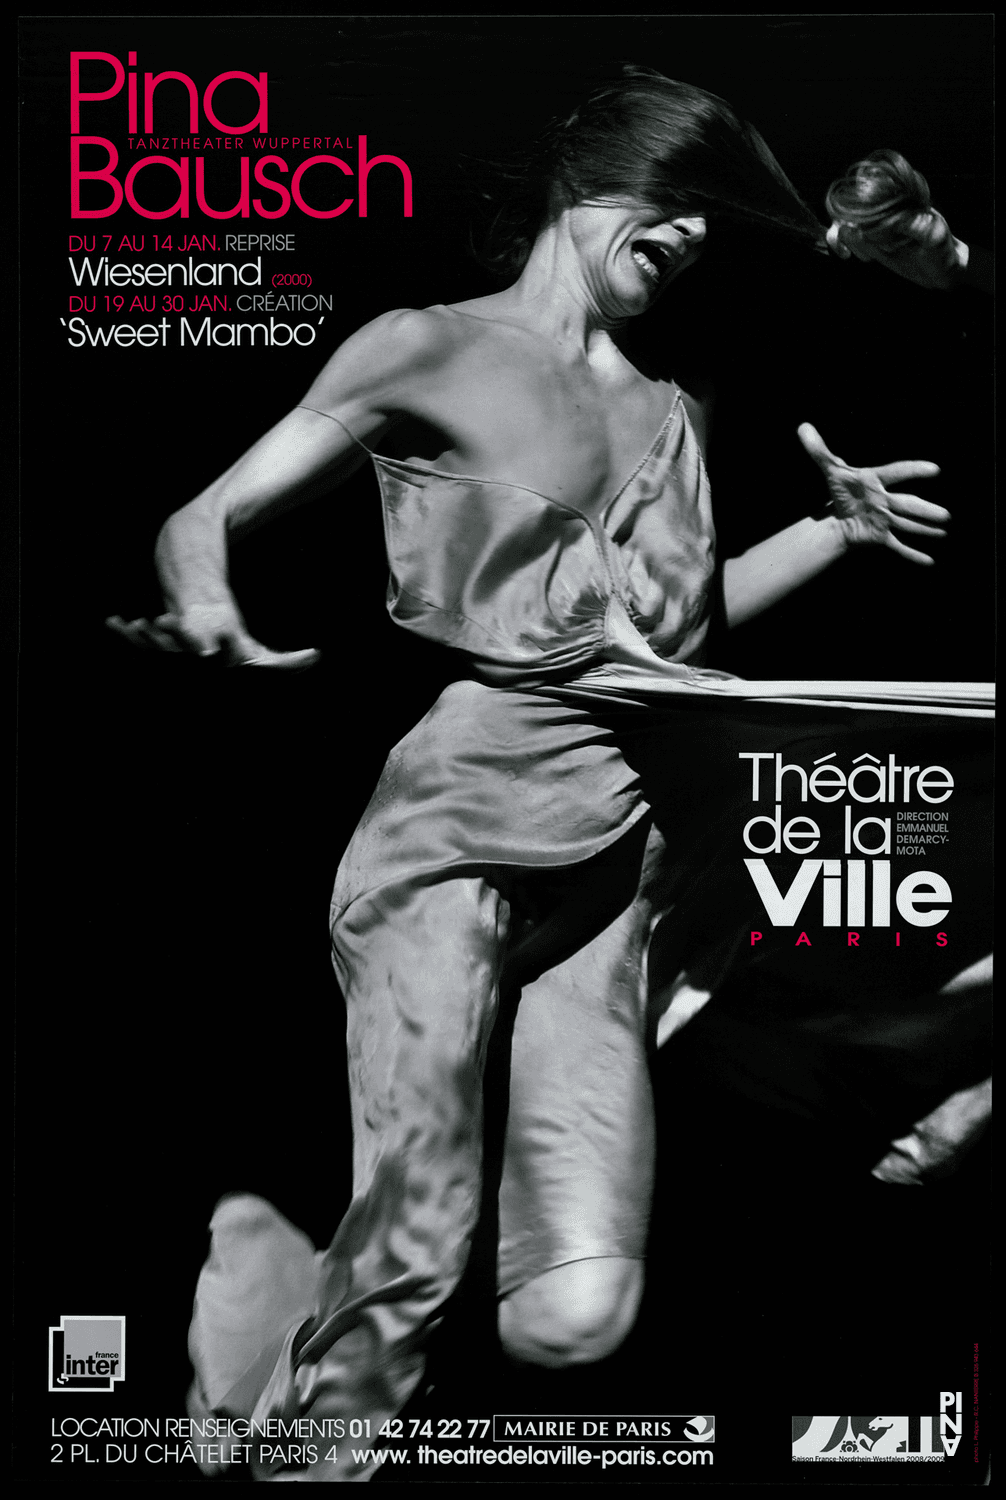 Poster: Laurent Philippe © Pina Bausch Foundation, Photo: Laurent Philippe